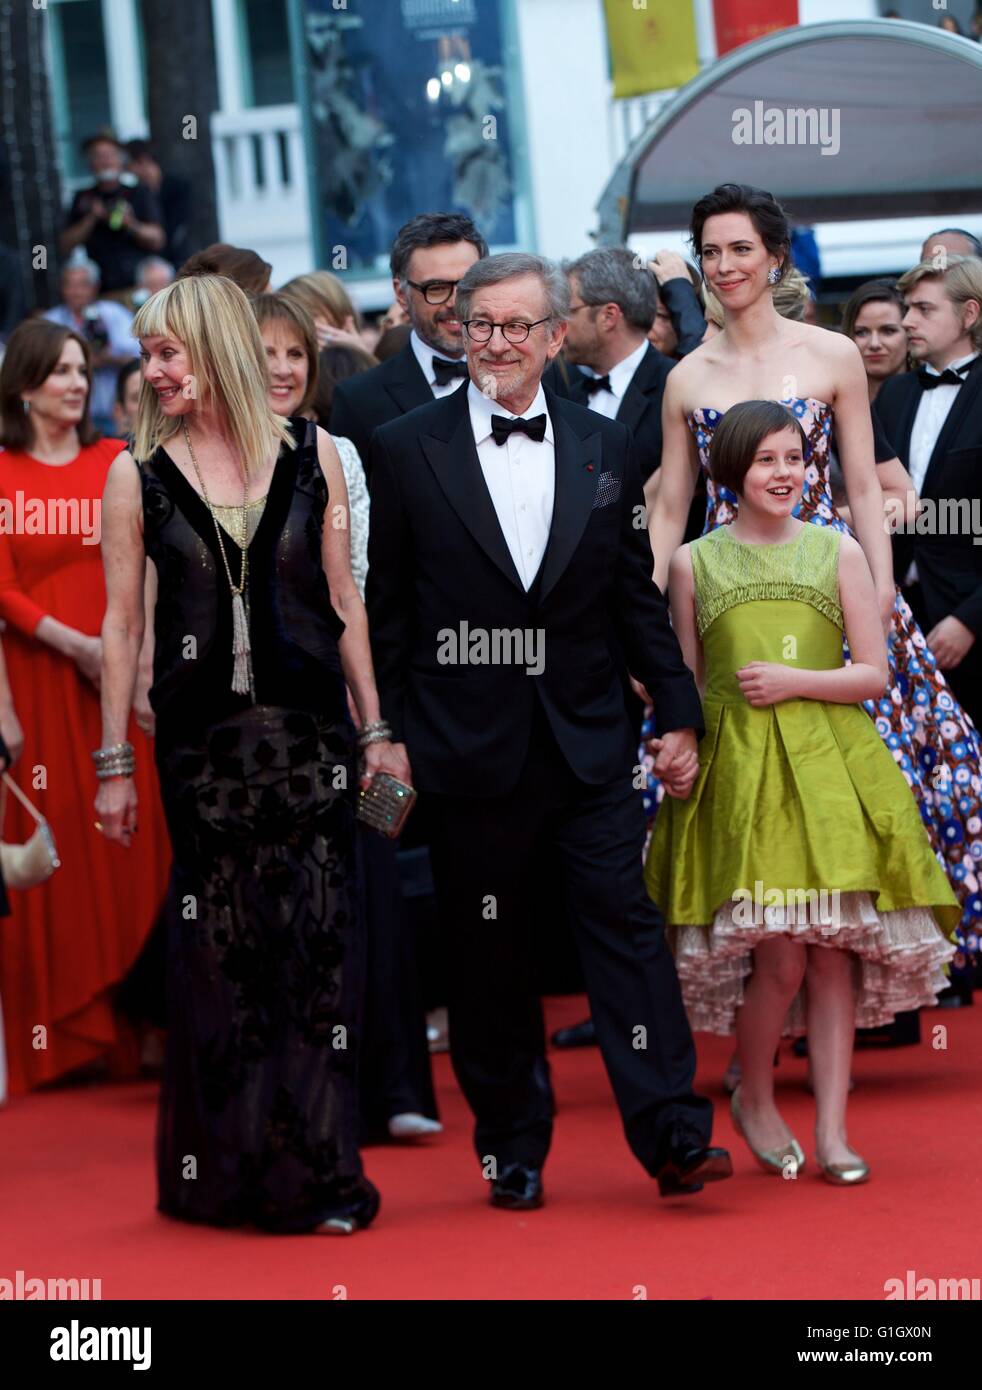 (160515) -- CANNES, May 15, 2016 (Xinhua) -- Director Steven Spielberg (front C) and his wife Kate Capshaw (front L) and cast member Ruby Barnhill (front R) pose on the red carpet as they arrive for the screening of the film 'The BFG' at the 69th Cannes Film Festival in Cannes, France, May 14, 2016.(Xinhua/Jin Yu) Stock Photo